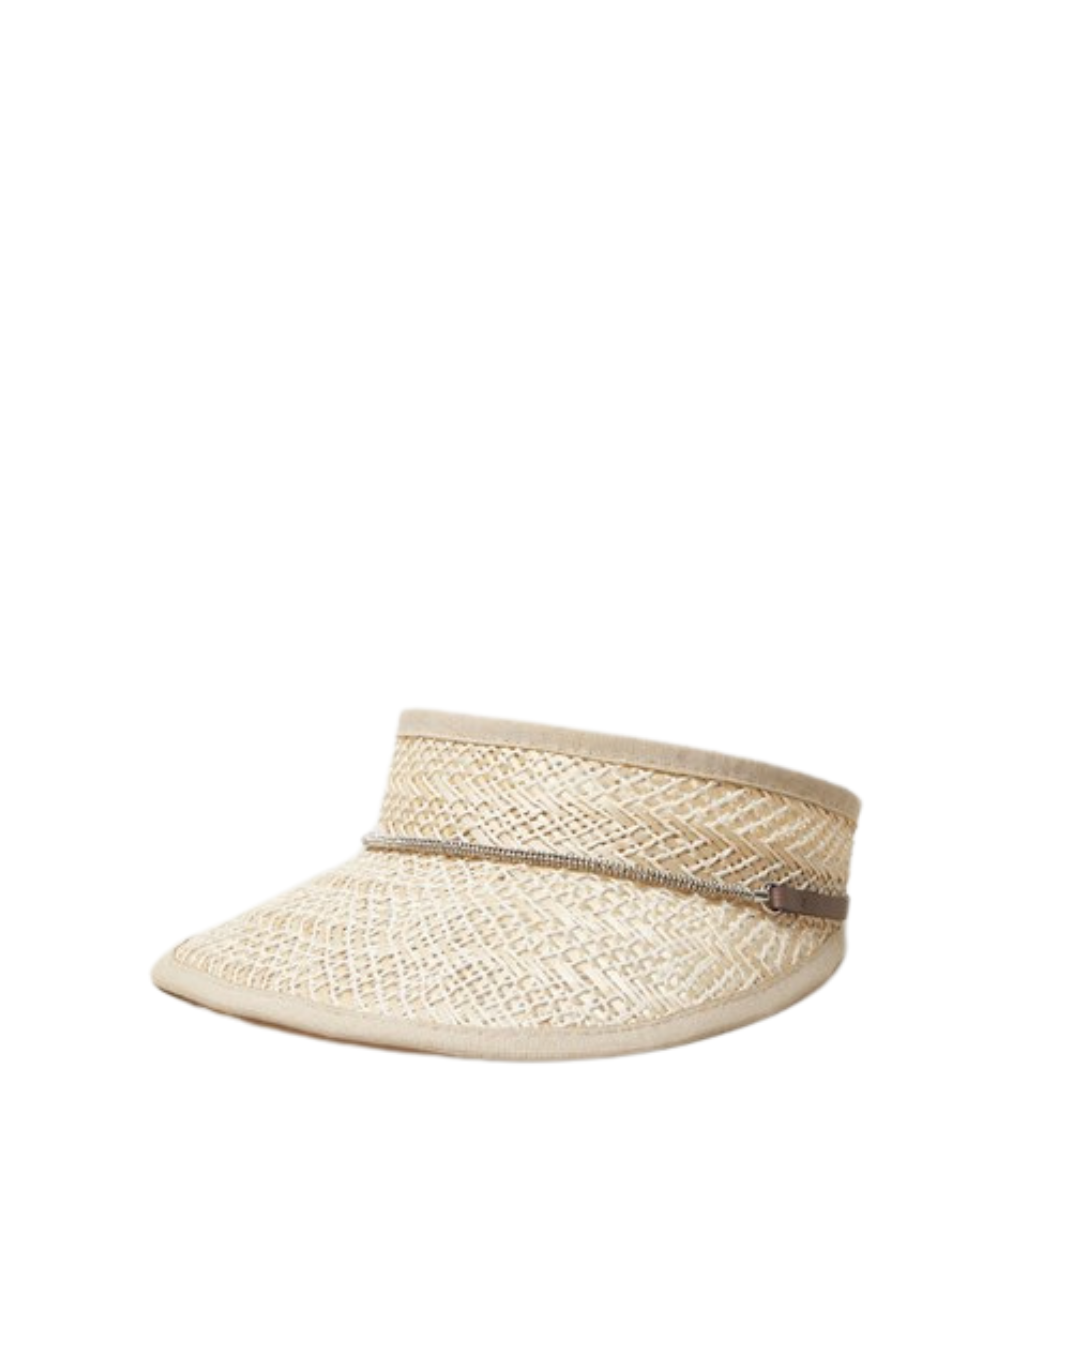 Sisal Visor with Chain + Leather Band in Sesame